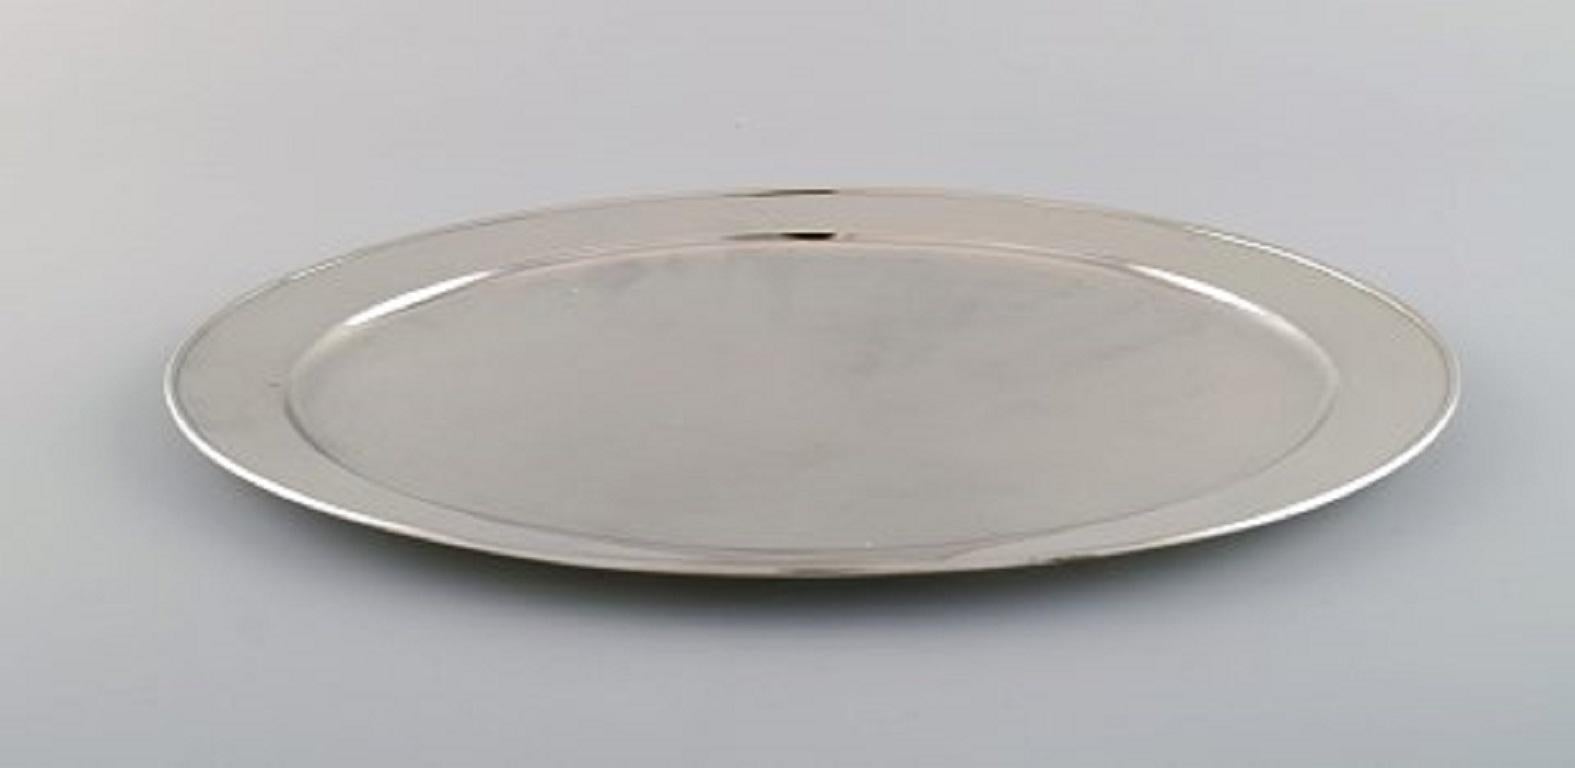 Tiffany & Company, New York. Oval serving dish in sterling silver. 1930s.
Measures: 32.5 x 22 cm.
In excellent condition.
Stamped.